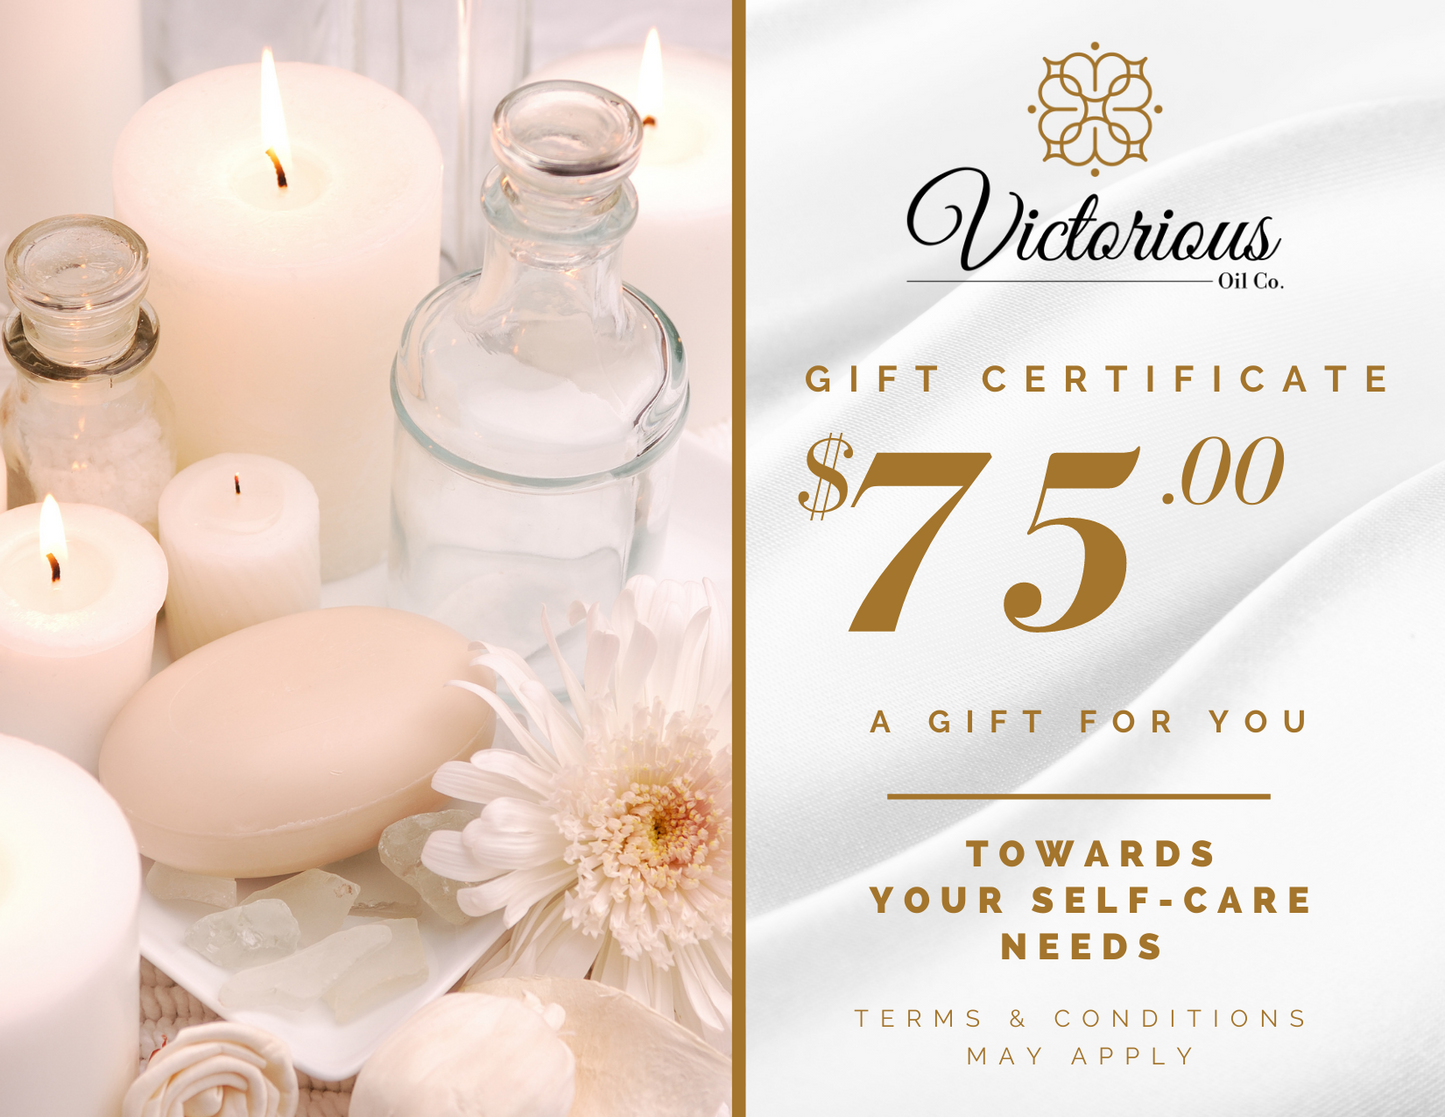 Victorious Oil Company Gift Certificates